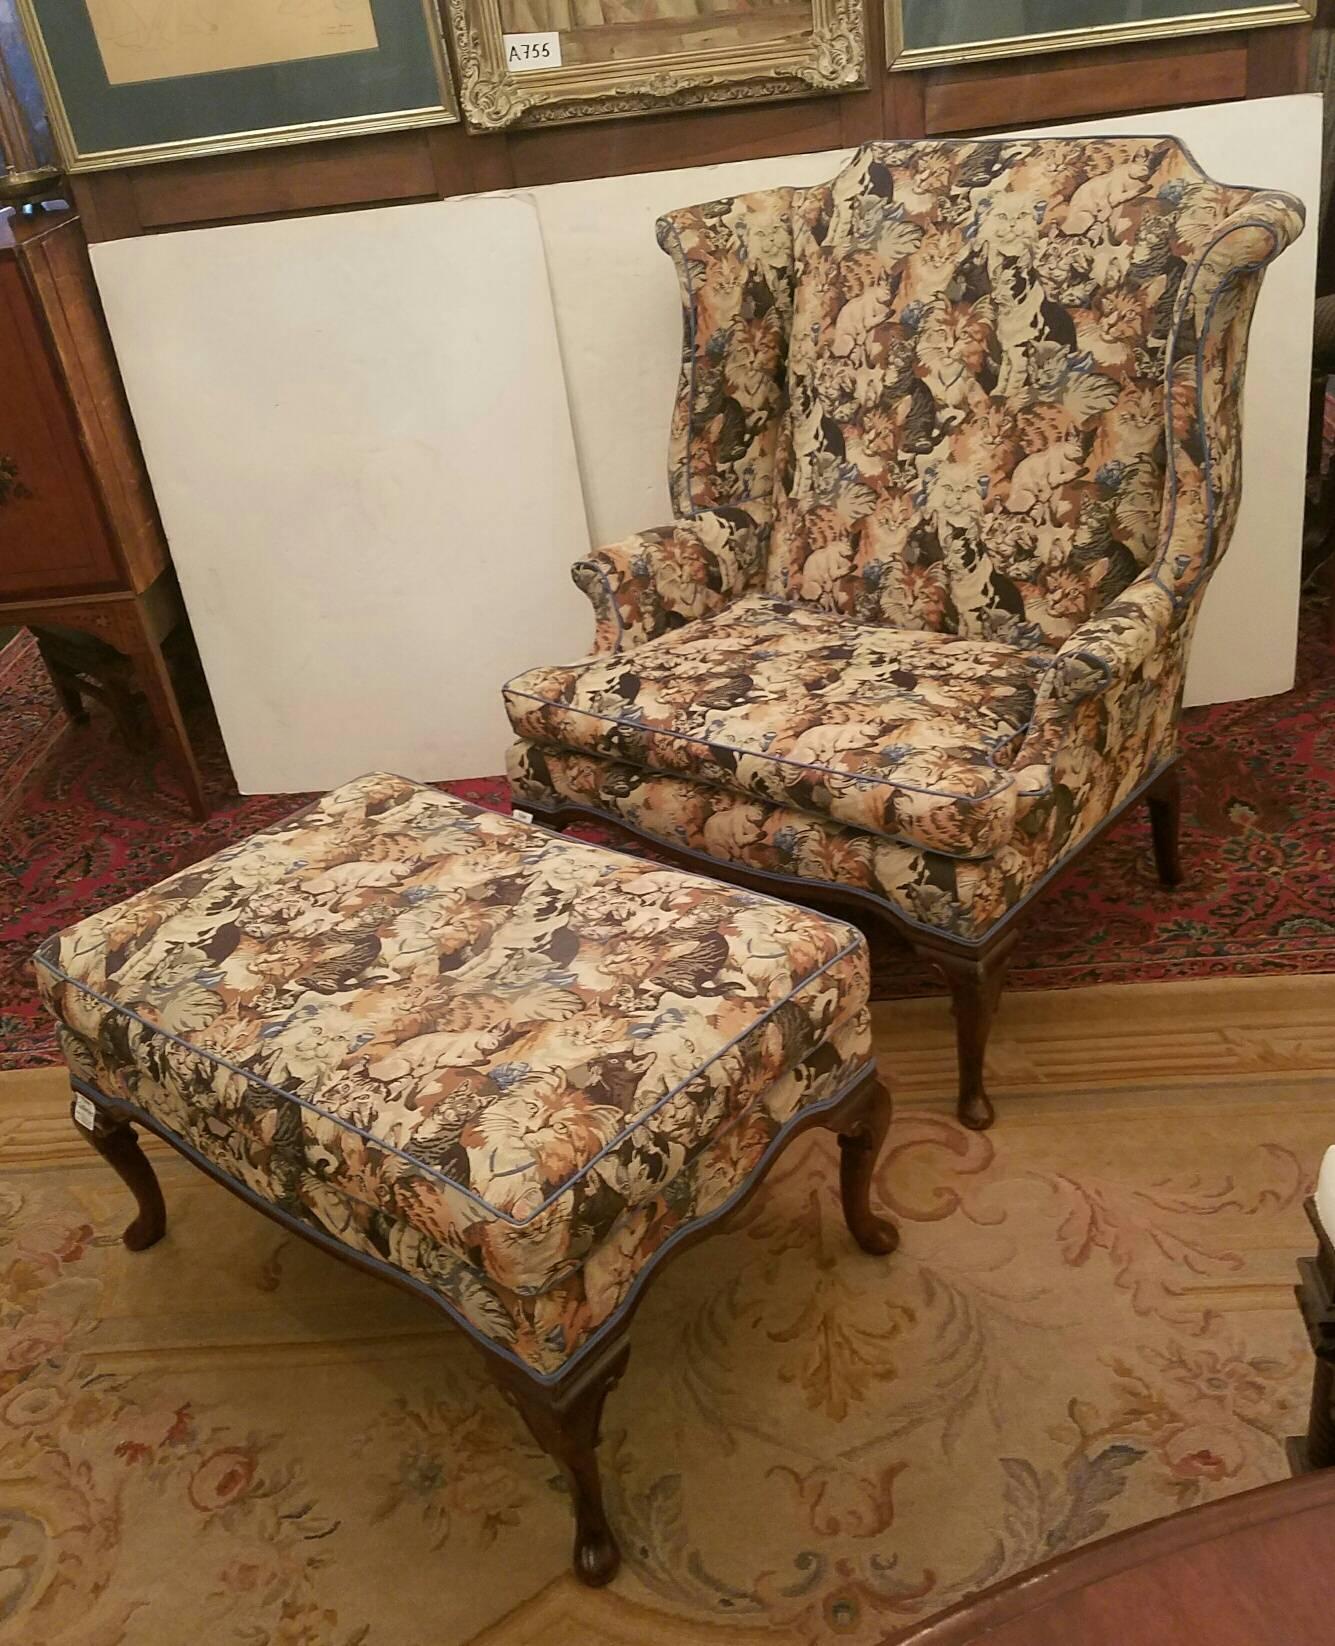 Oversized Queen Anne wing chair and ottoman in a beautiful jacquard cat pattern with contrast welt cord. 

Chair: H: 41